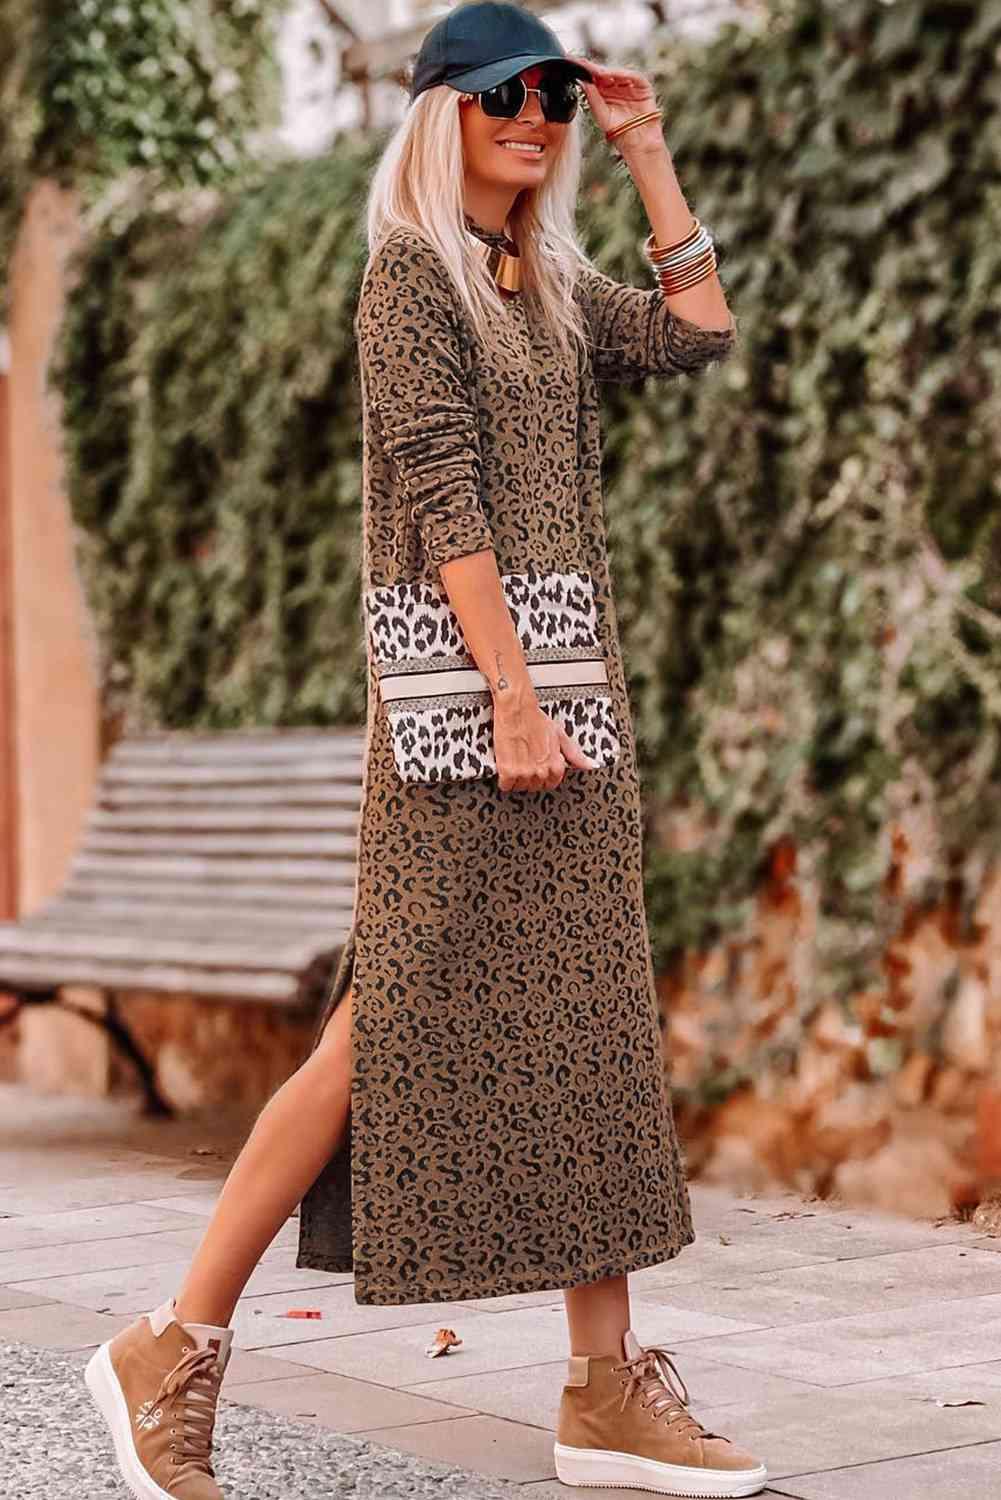 a woman wearing a leopard print dress and sneakers